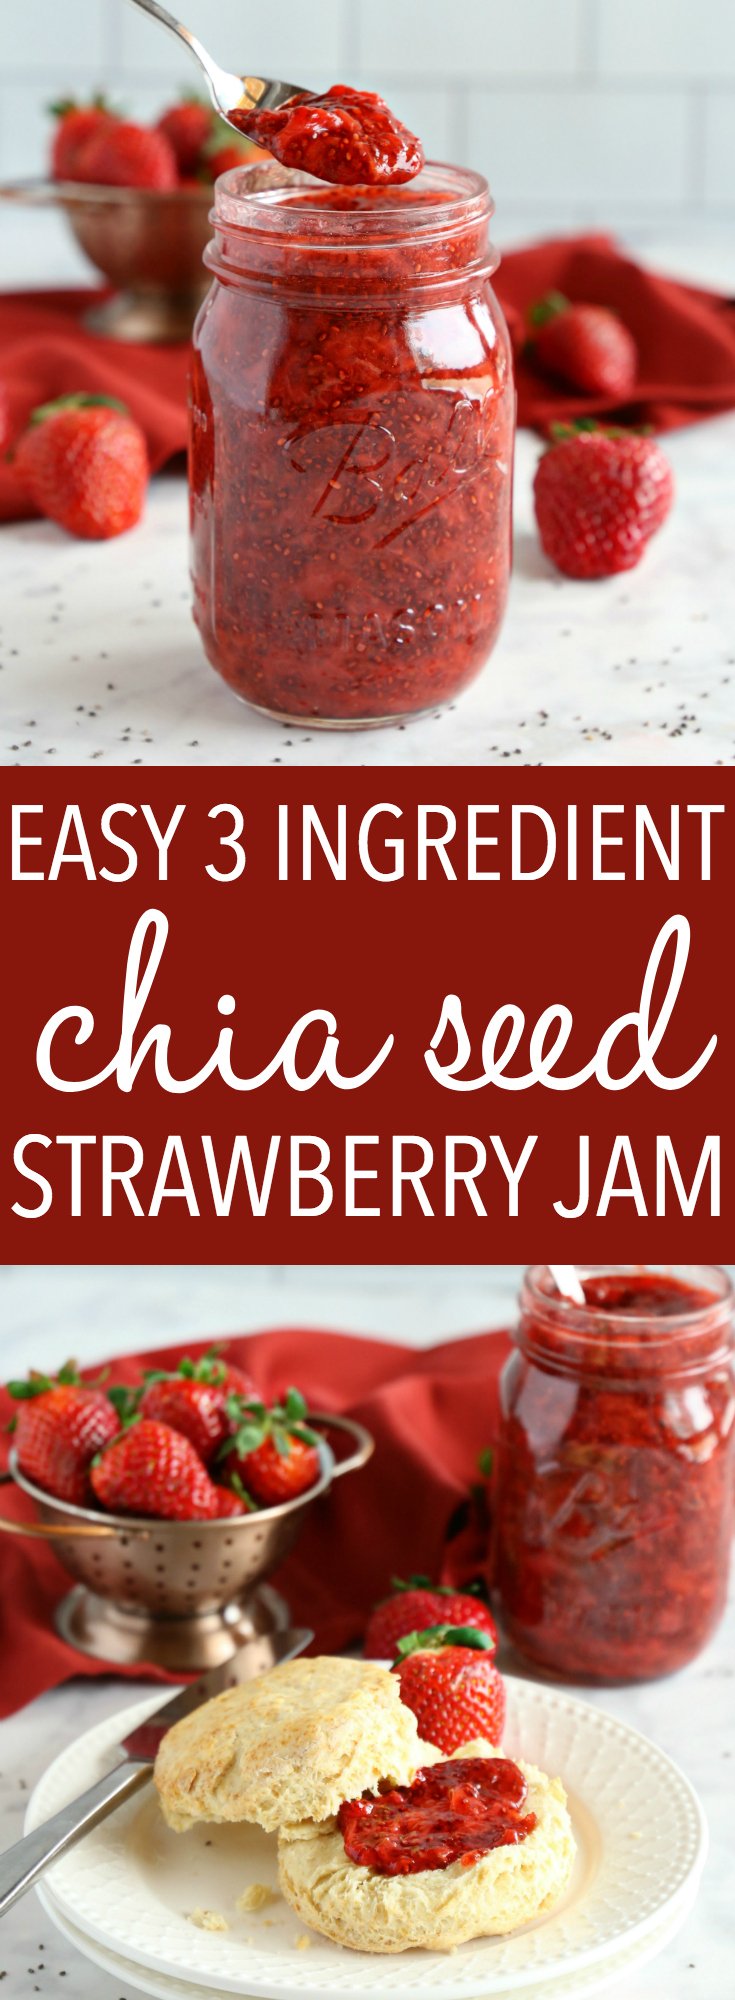 This Easy 3-Ingredient Chia Seed Strawberry Jam is the perfect healthy alternative to conventional jam! It's made with 3 healthy, natural, whole-food ingredients and it's quick and easy to make! Recipe from thebusybaker.ca! #healthyjam #chiaseedjam #homemadestrawberryjam via @busybakerblog